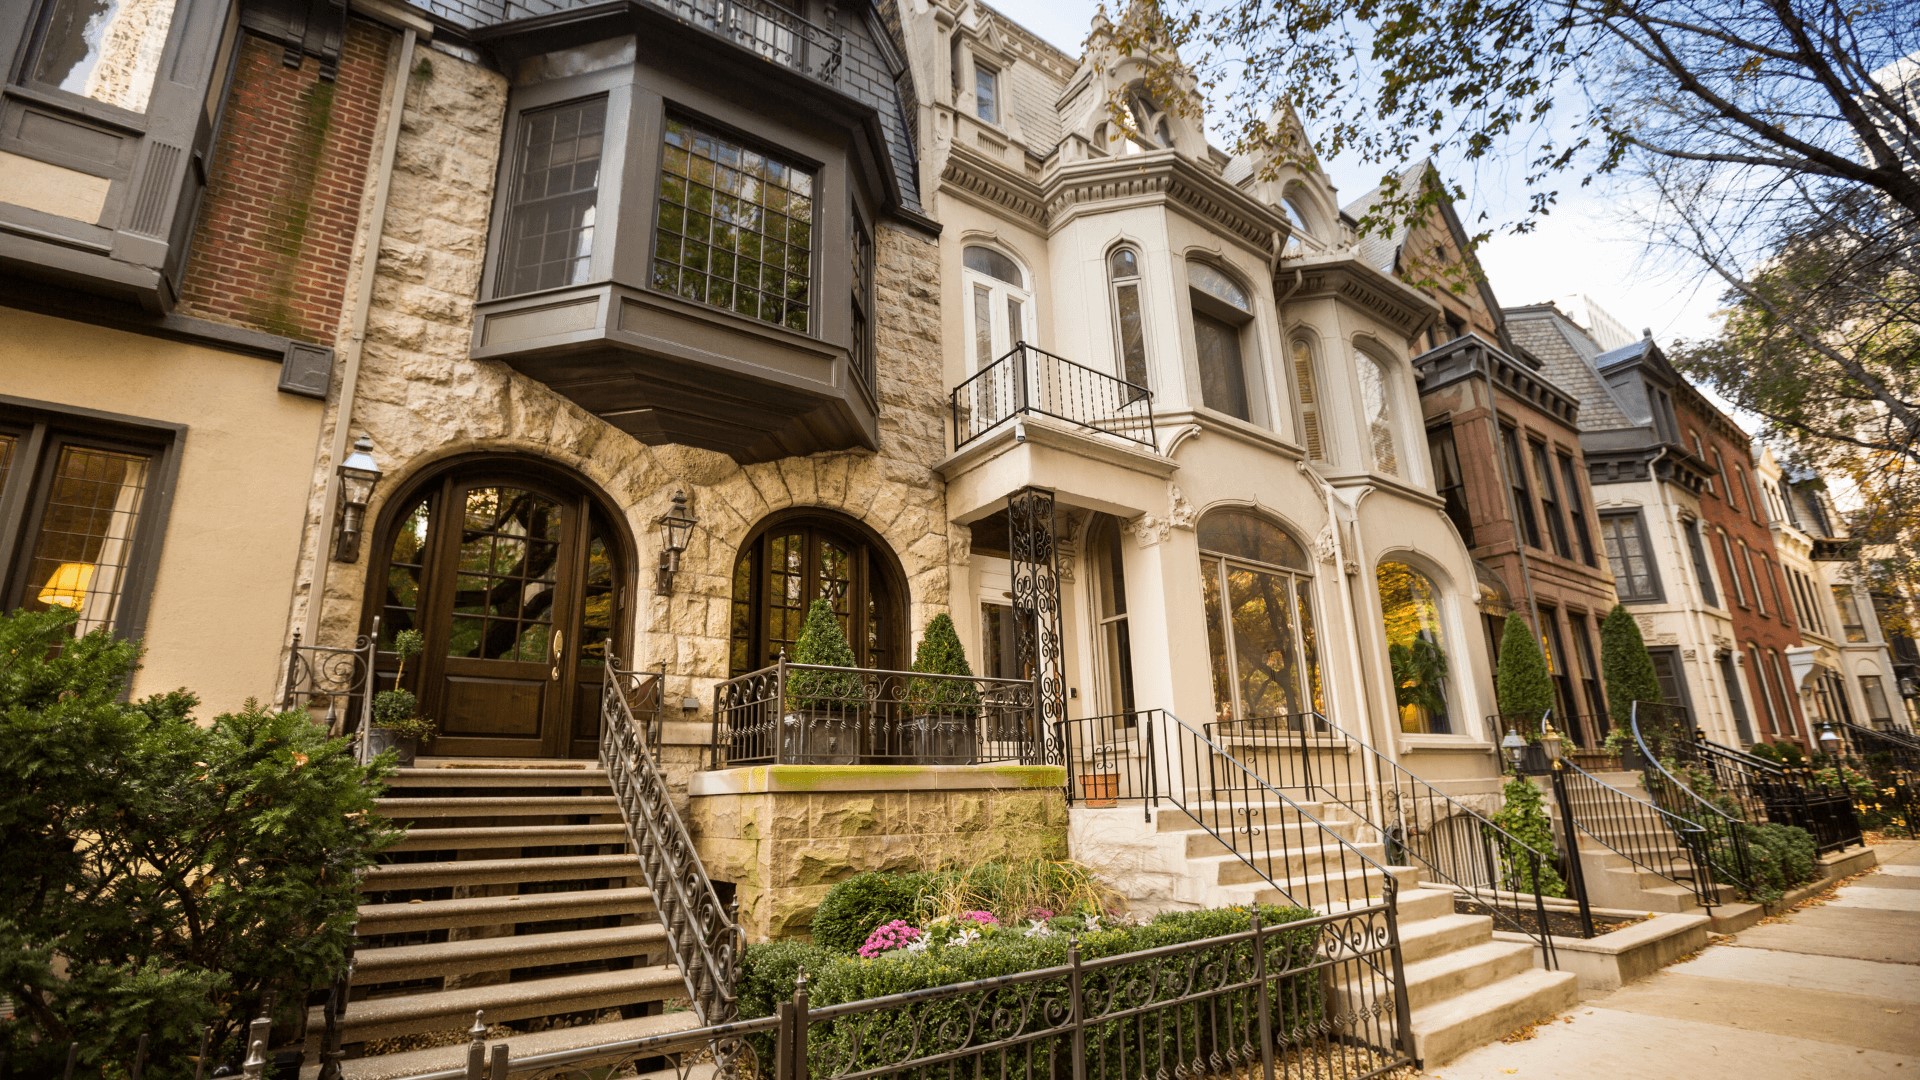 Victorian houses on a city street in the old town of Chicago